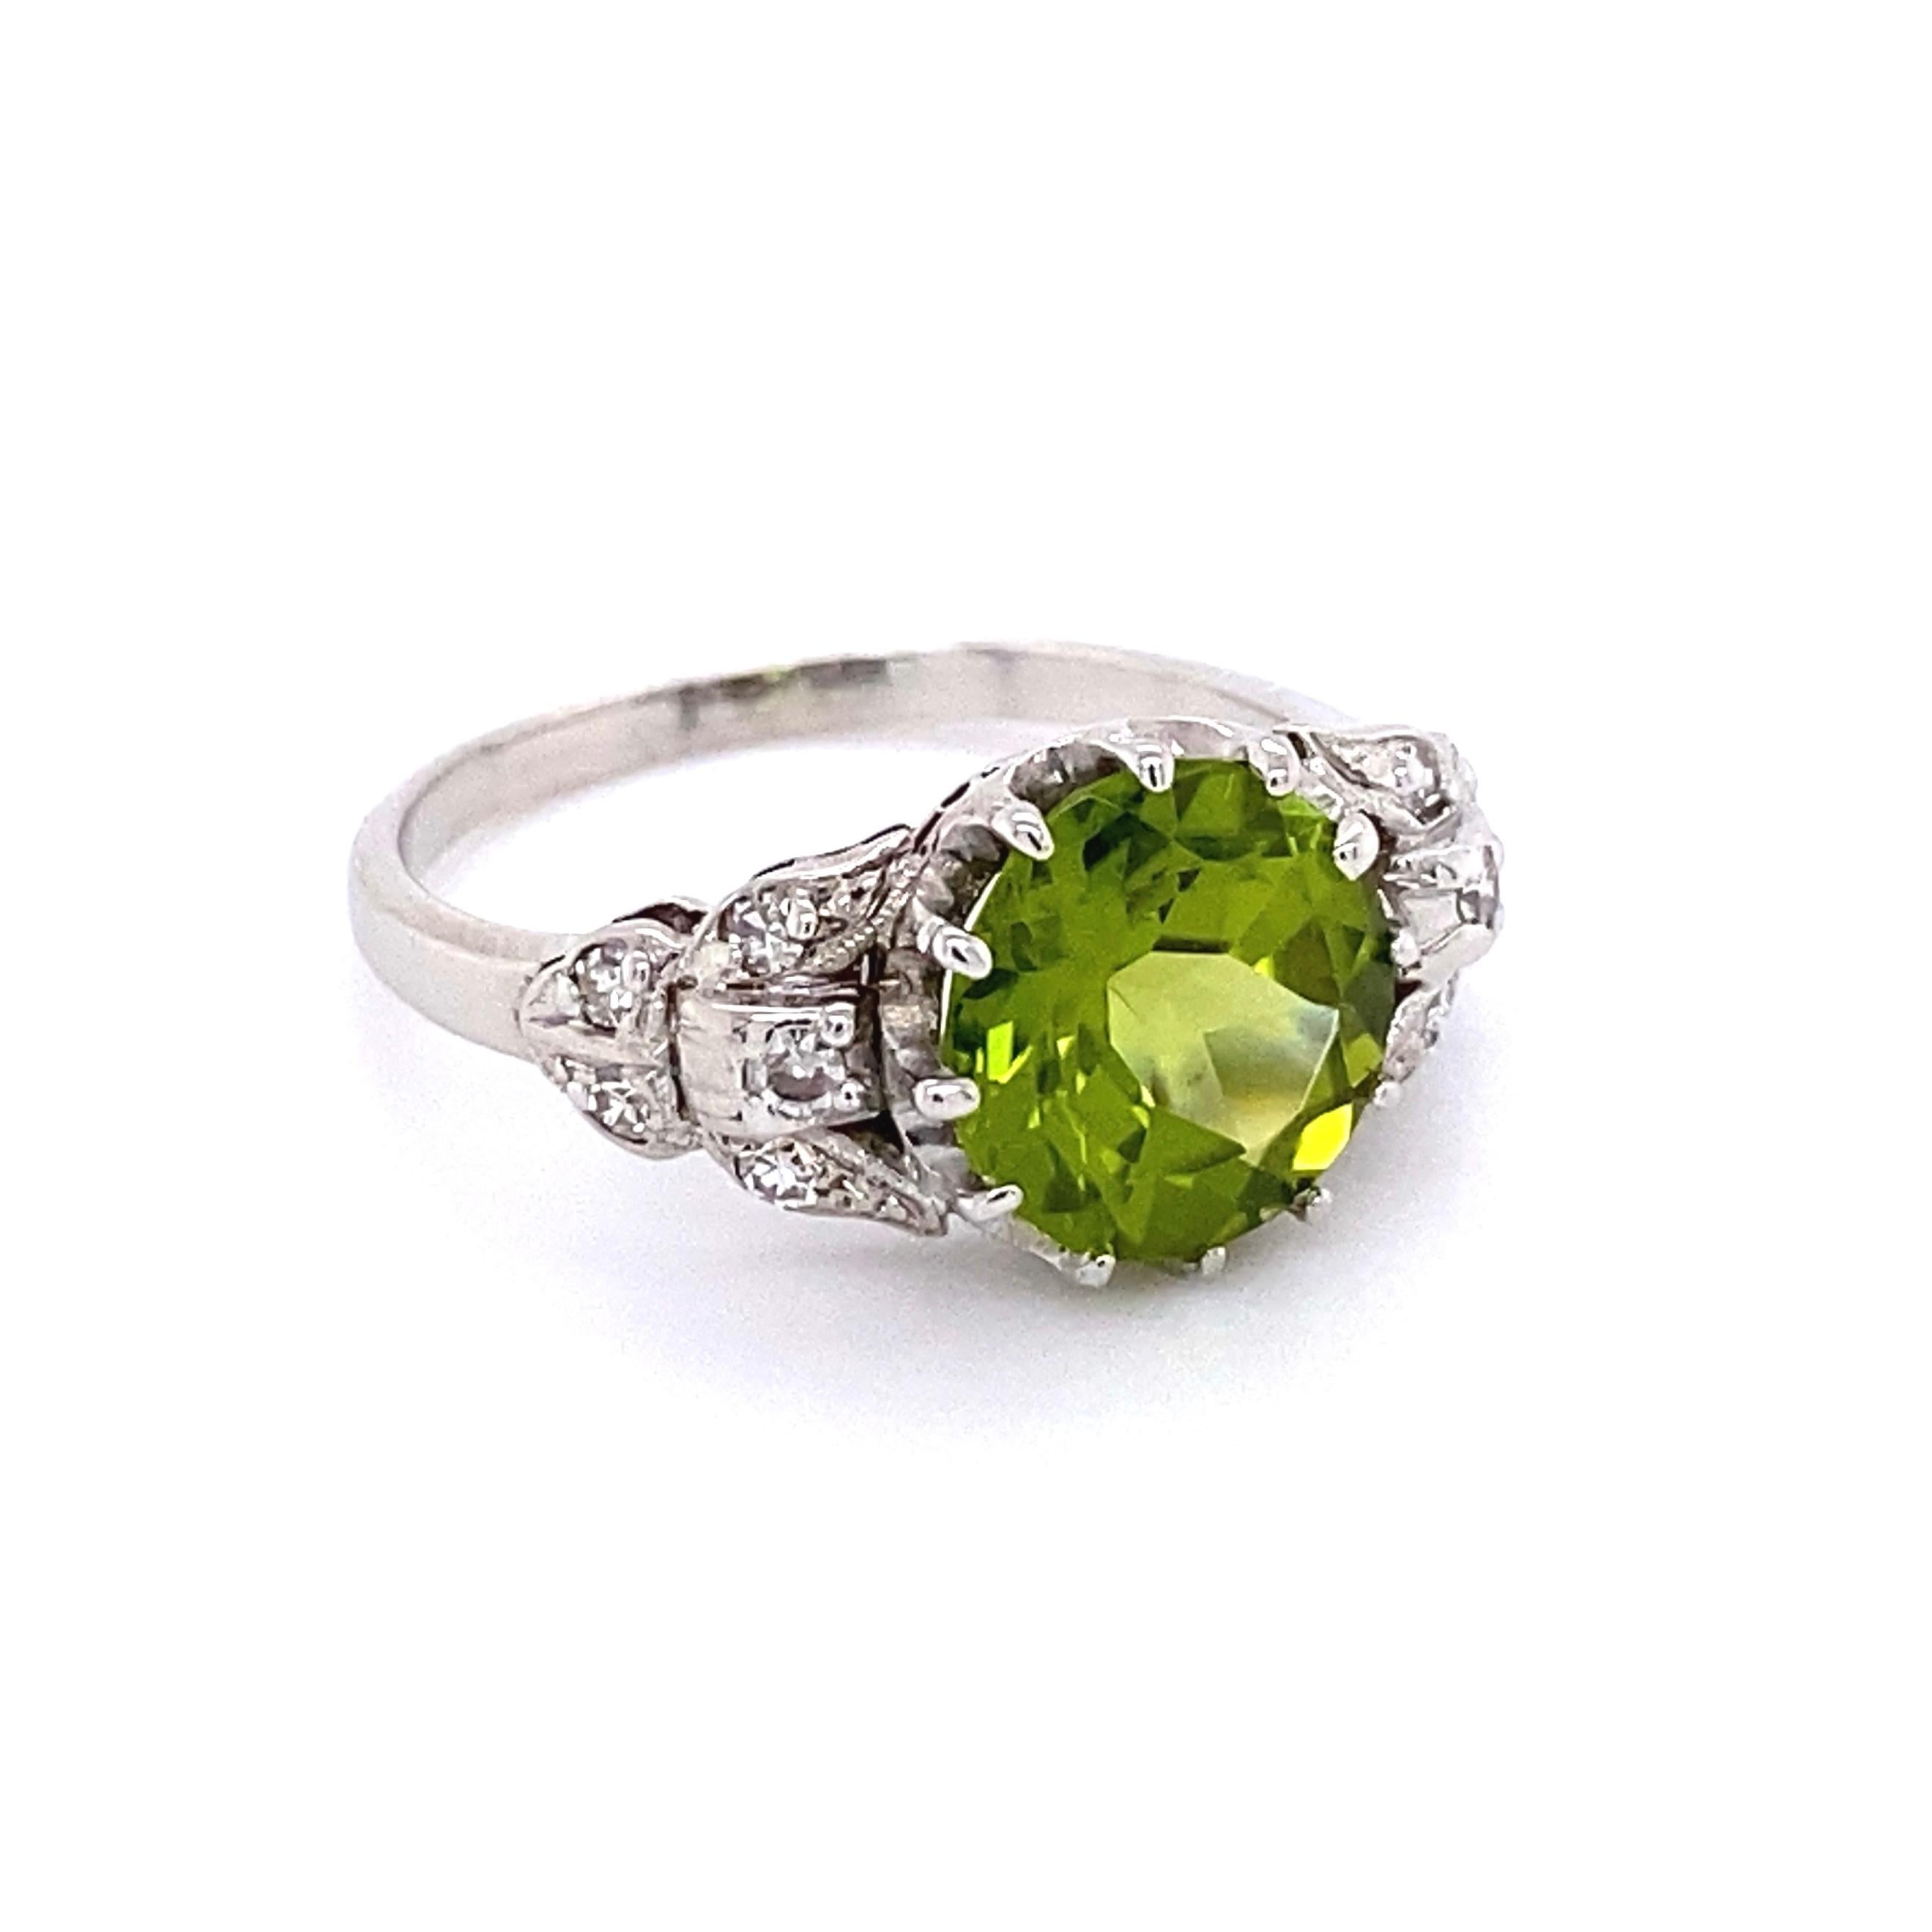 Simply Beautiful! Peridot and Diamond Art Deco Revival Ring. Center securely set with a Peridot, weighing approx. 2.54 Carat, accented by Diamonds on either side, weighing approx.0.10tcw. Finely detailed Hand crafted Platinum mounting. Ring measures